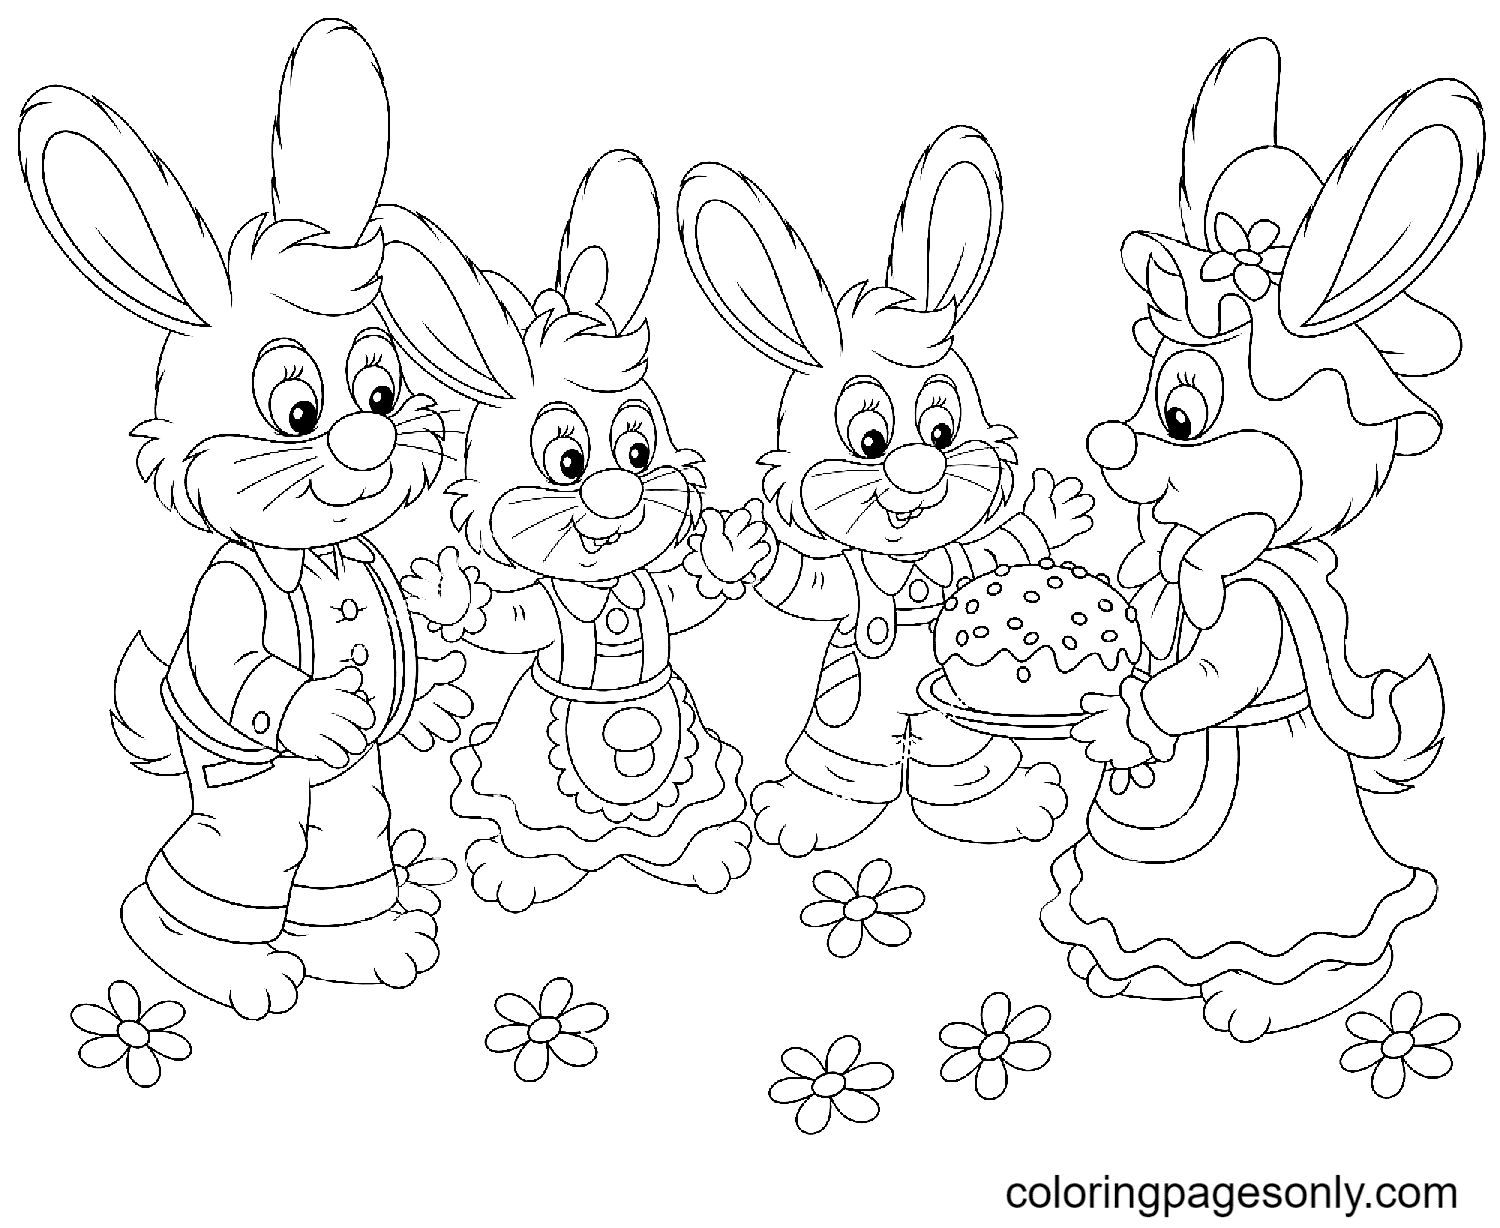 Bunnies with an Easter cake Coloring Page